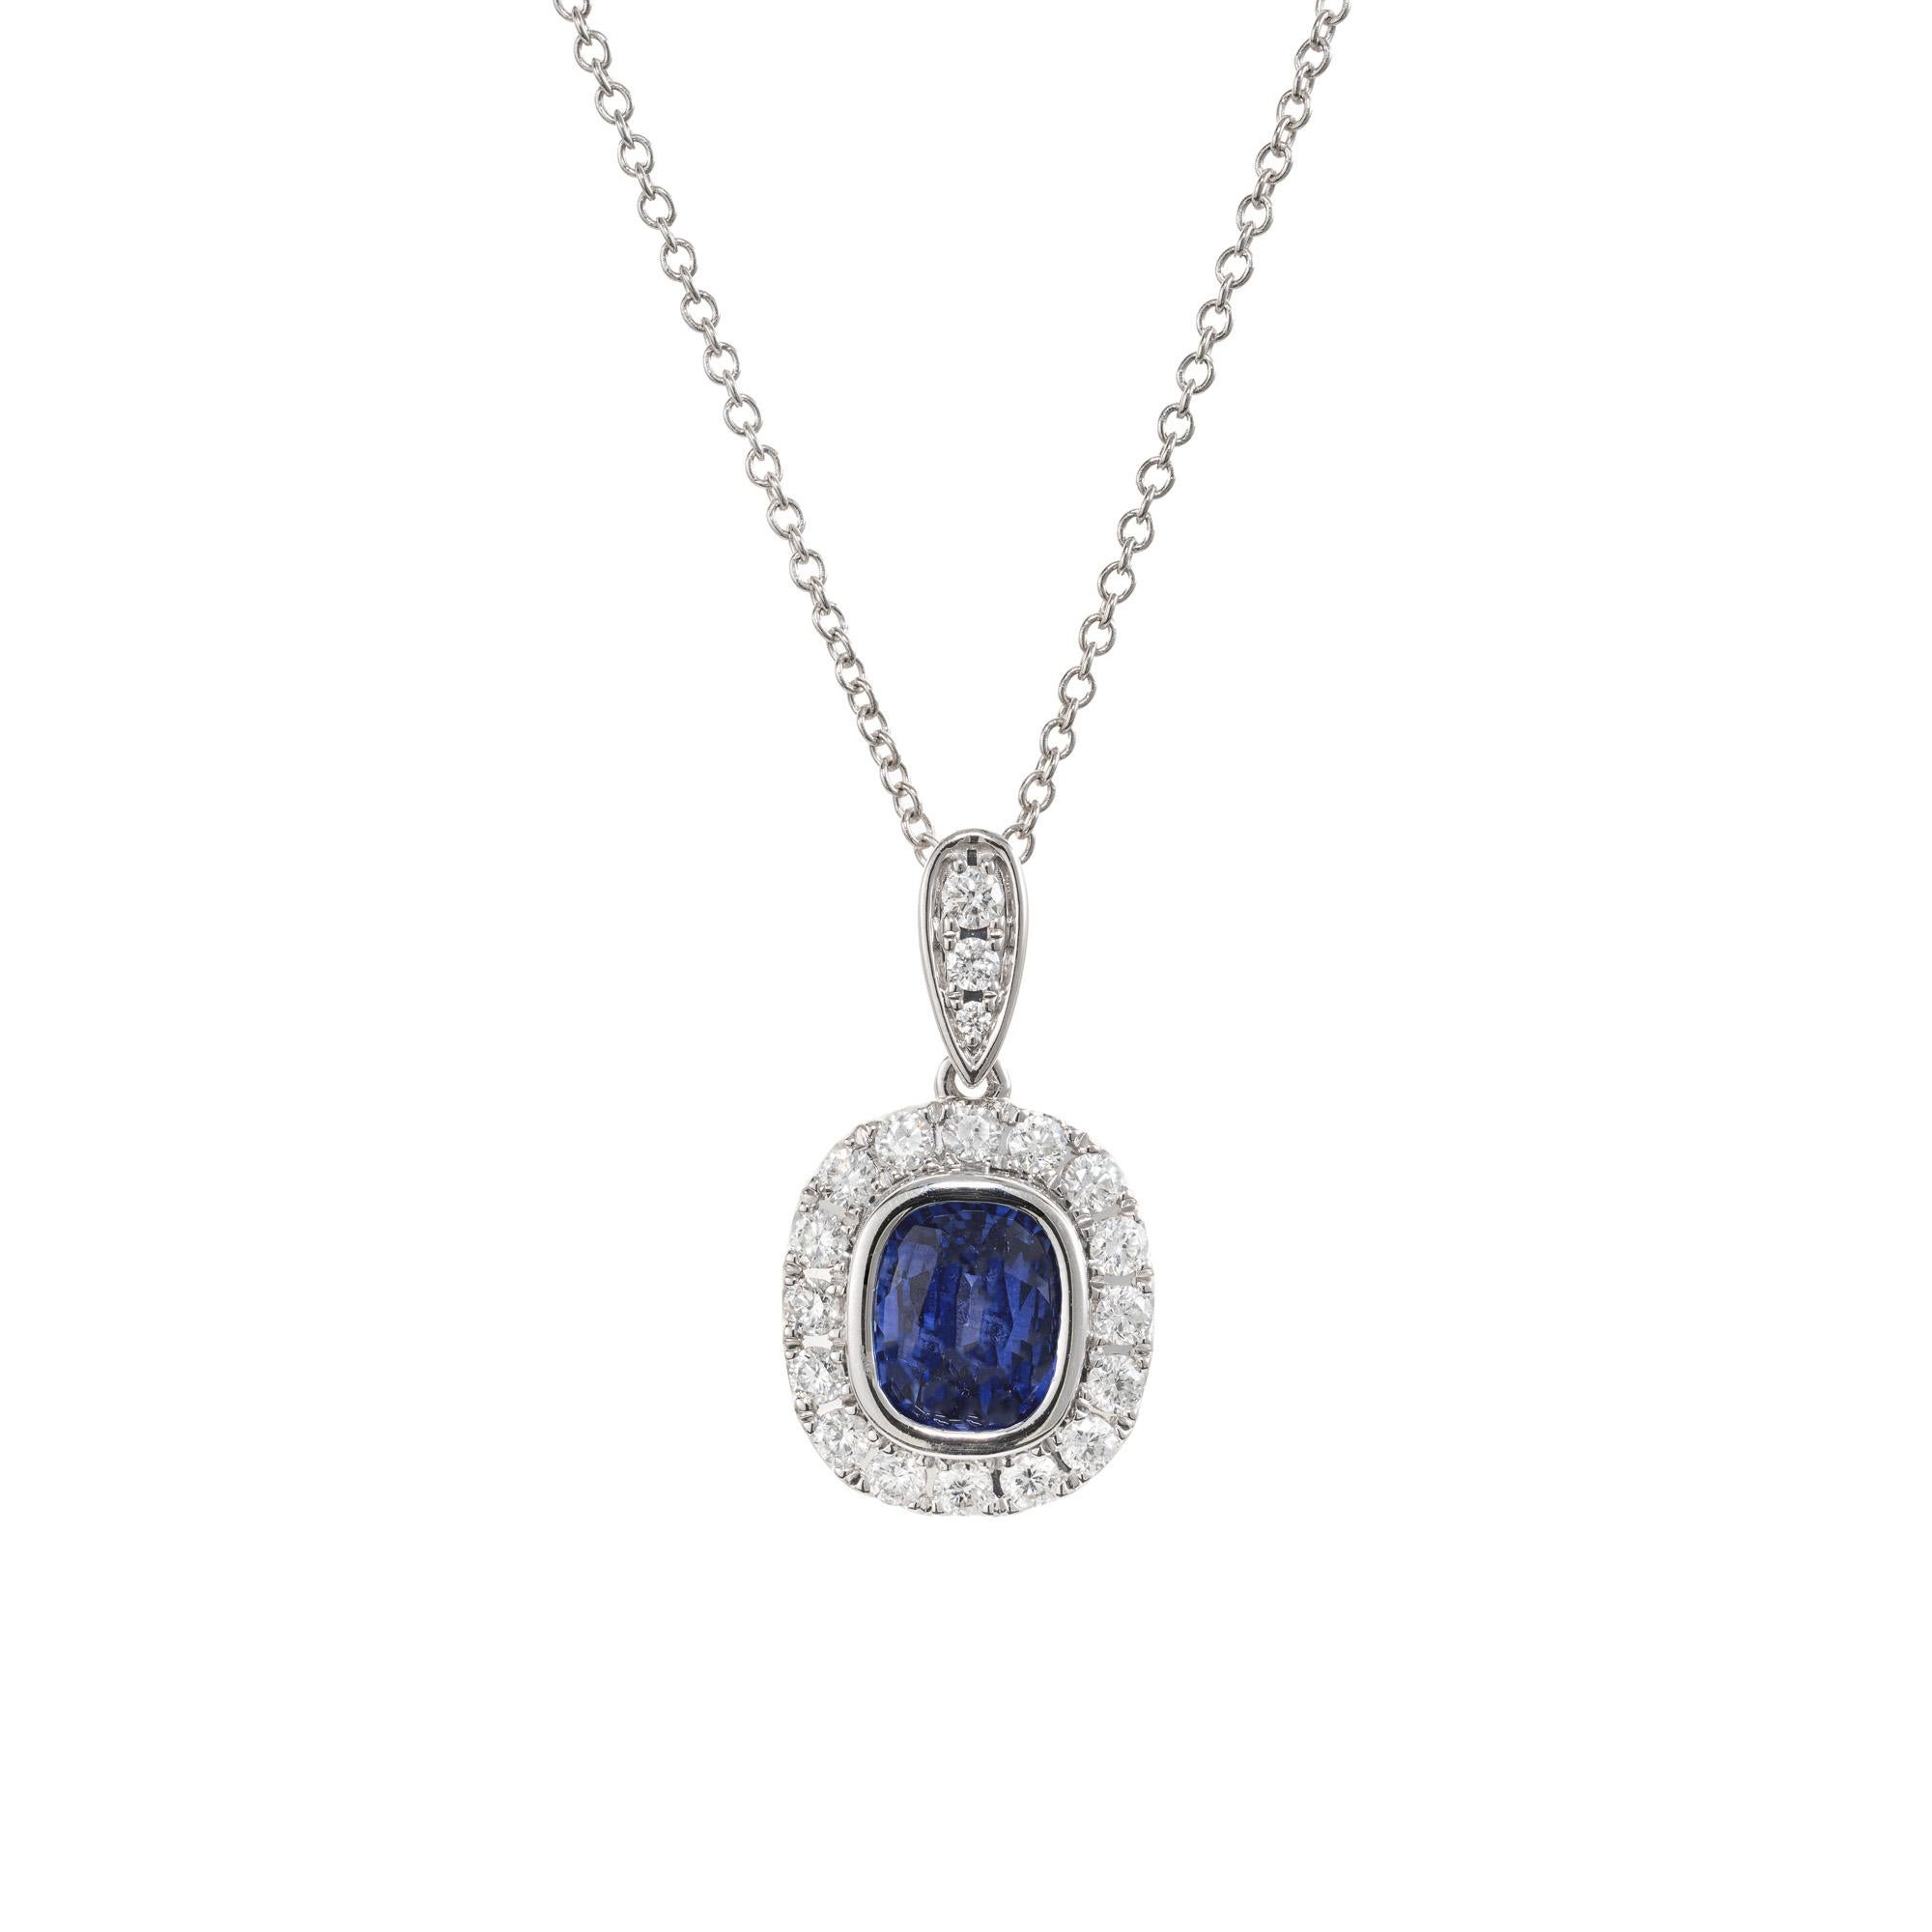 Peter Suchy blue sapphire diamond white gold pendant necklace. This beautiful piece showcases a 1.08 carat cushion cut brilliant blue sapphire, surrounded by dazzling halo of full cut diamonds, set in 14k white gold, accented by 3 diamonds on the